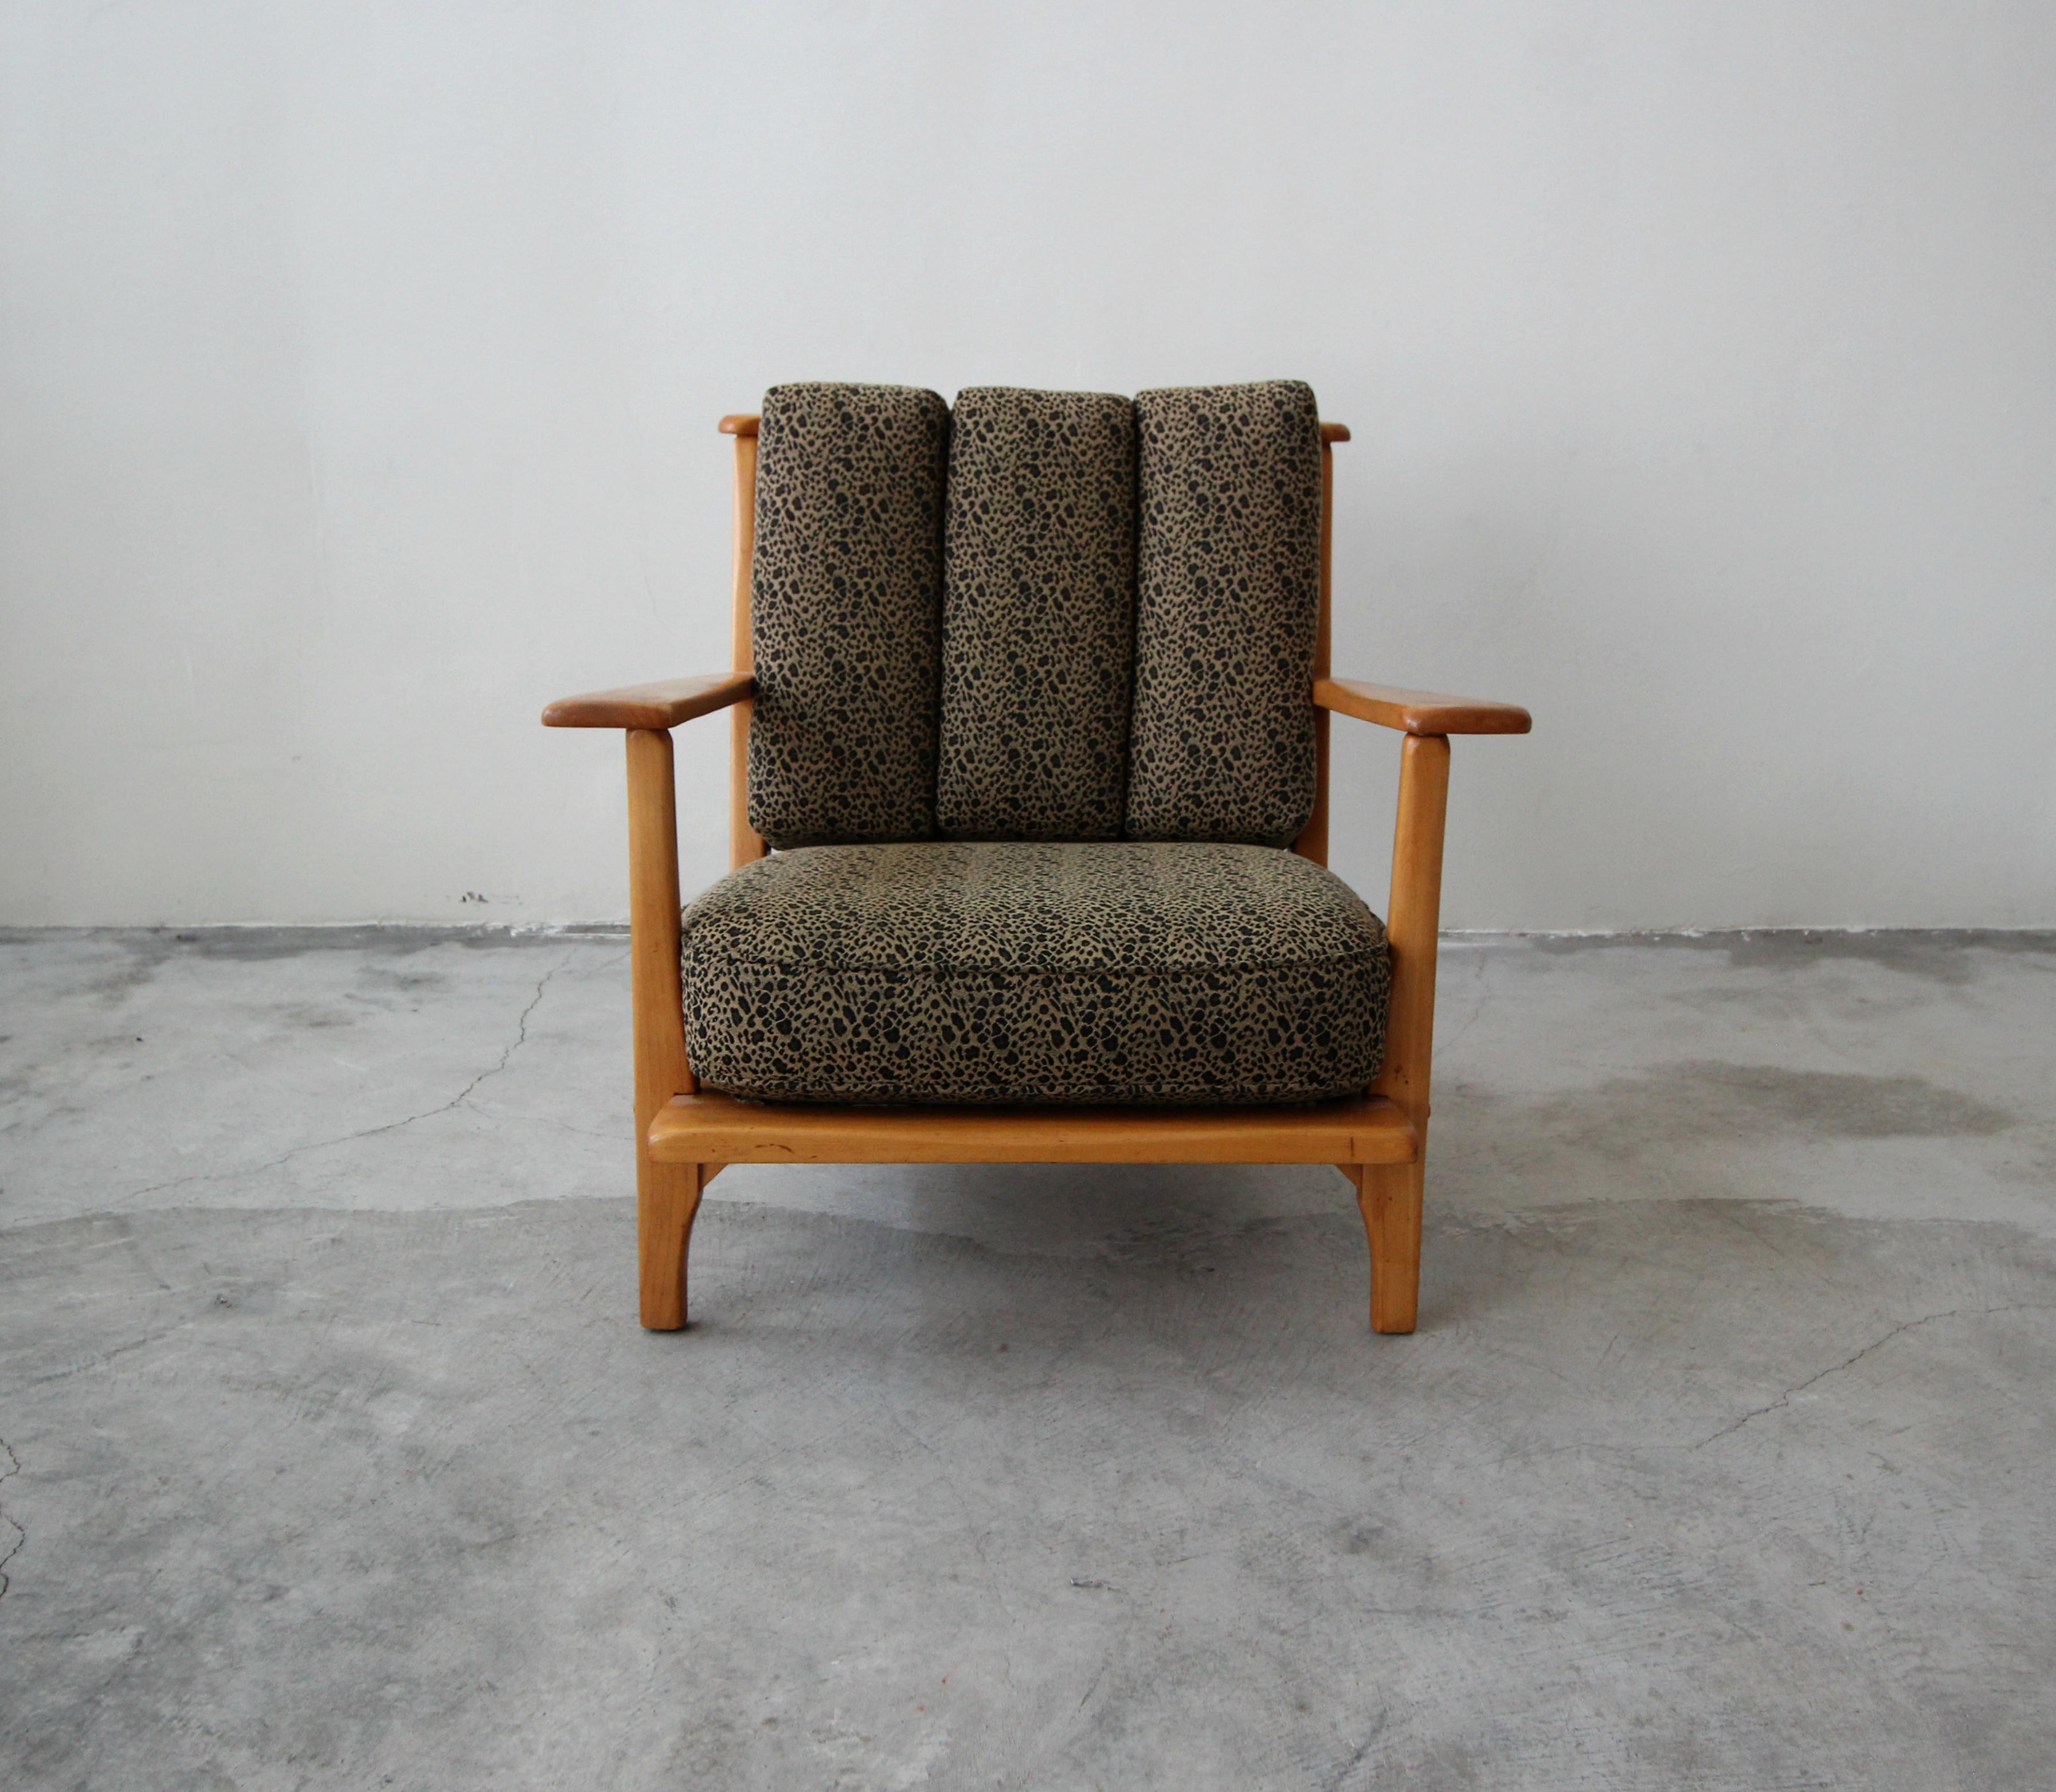 20th Century Midcentury Craftsman Style Lounge Chair by Cushman